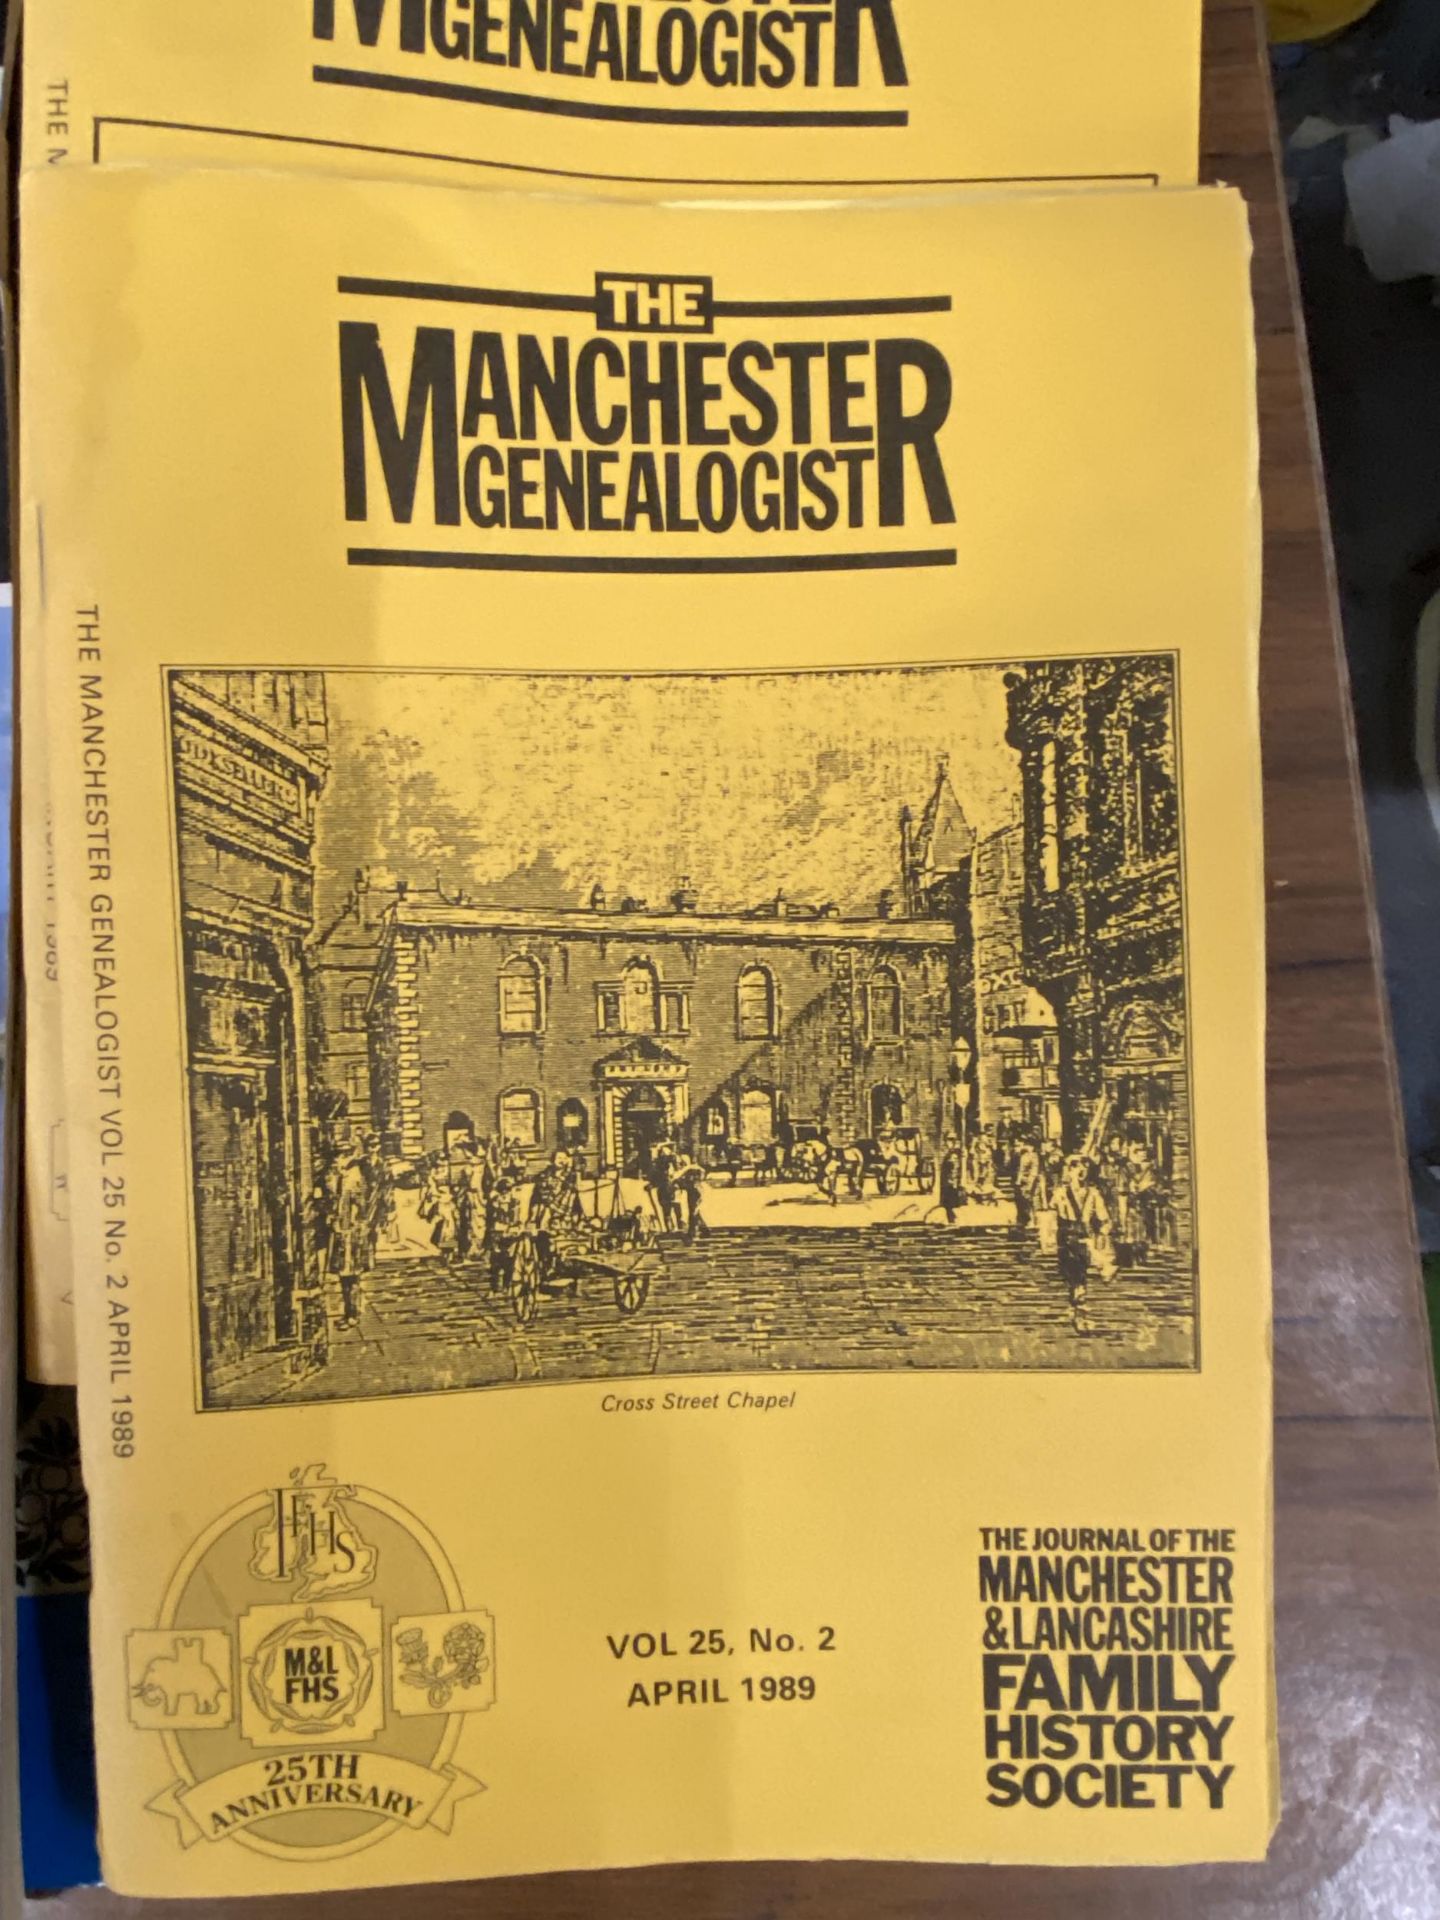 A GROUP OF THE DALESMAN AND MANCHESTER GENEALOGIST BOOKS - Image 2 of 4